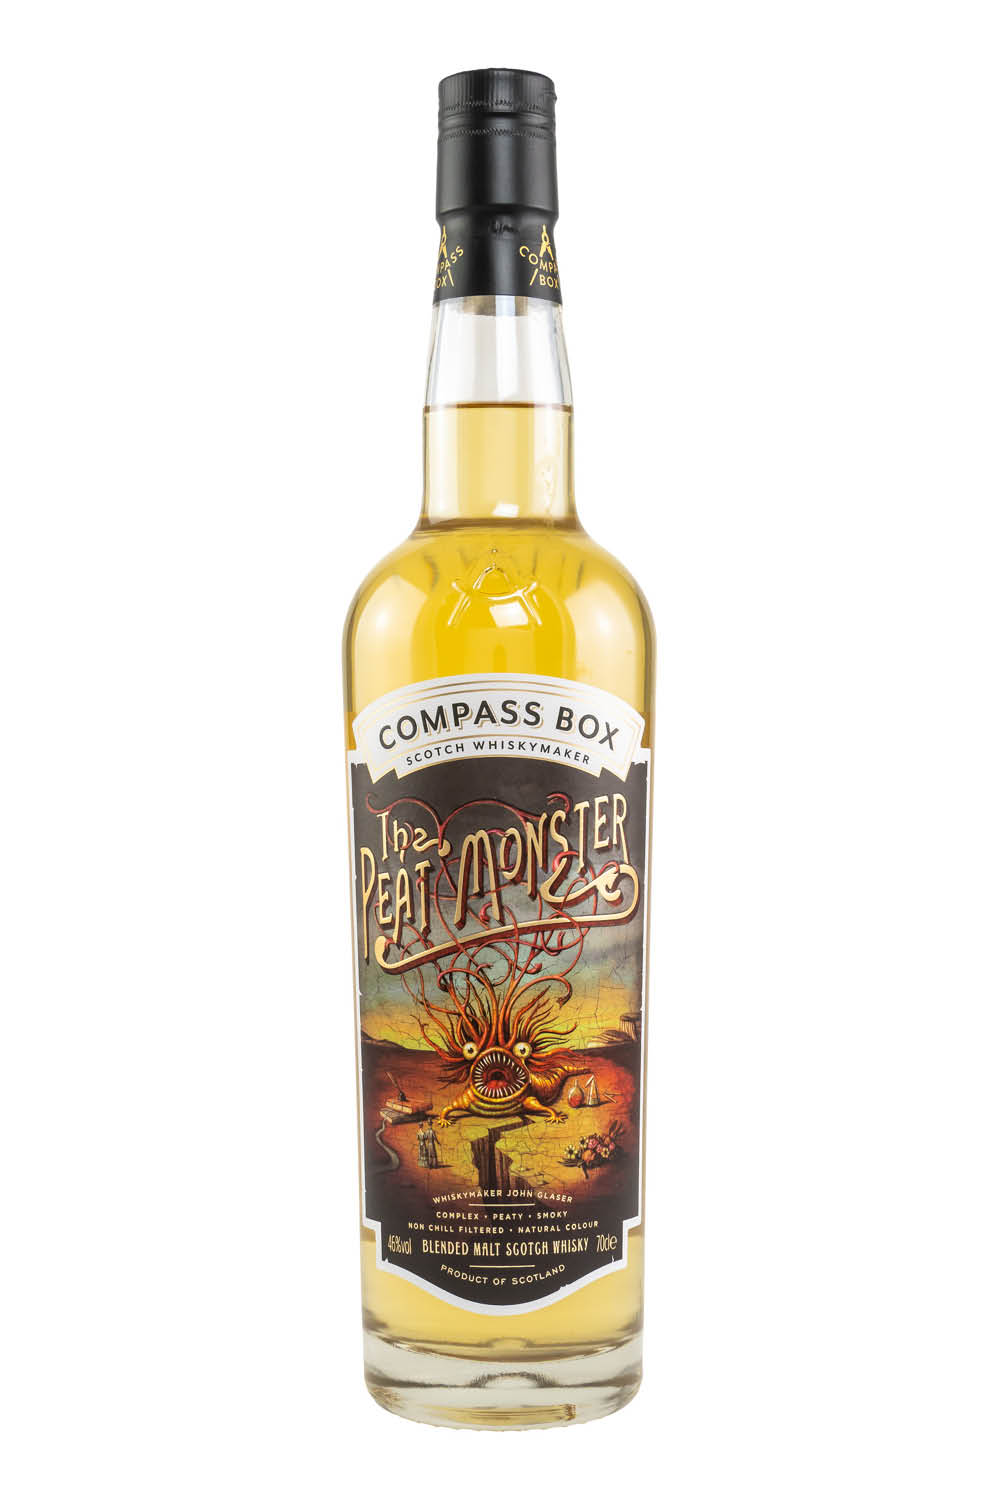 101702_Compass_Box_The_Peat_Monster_Blended_Malt_Scotch_Whisky